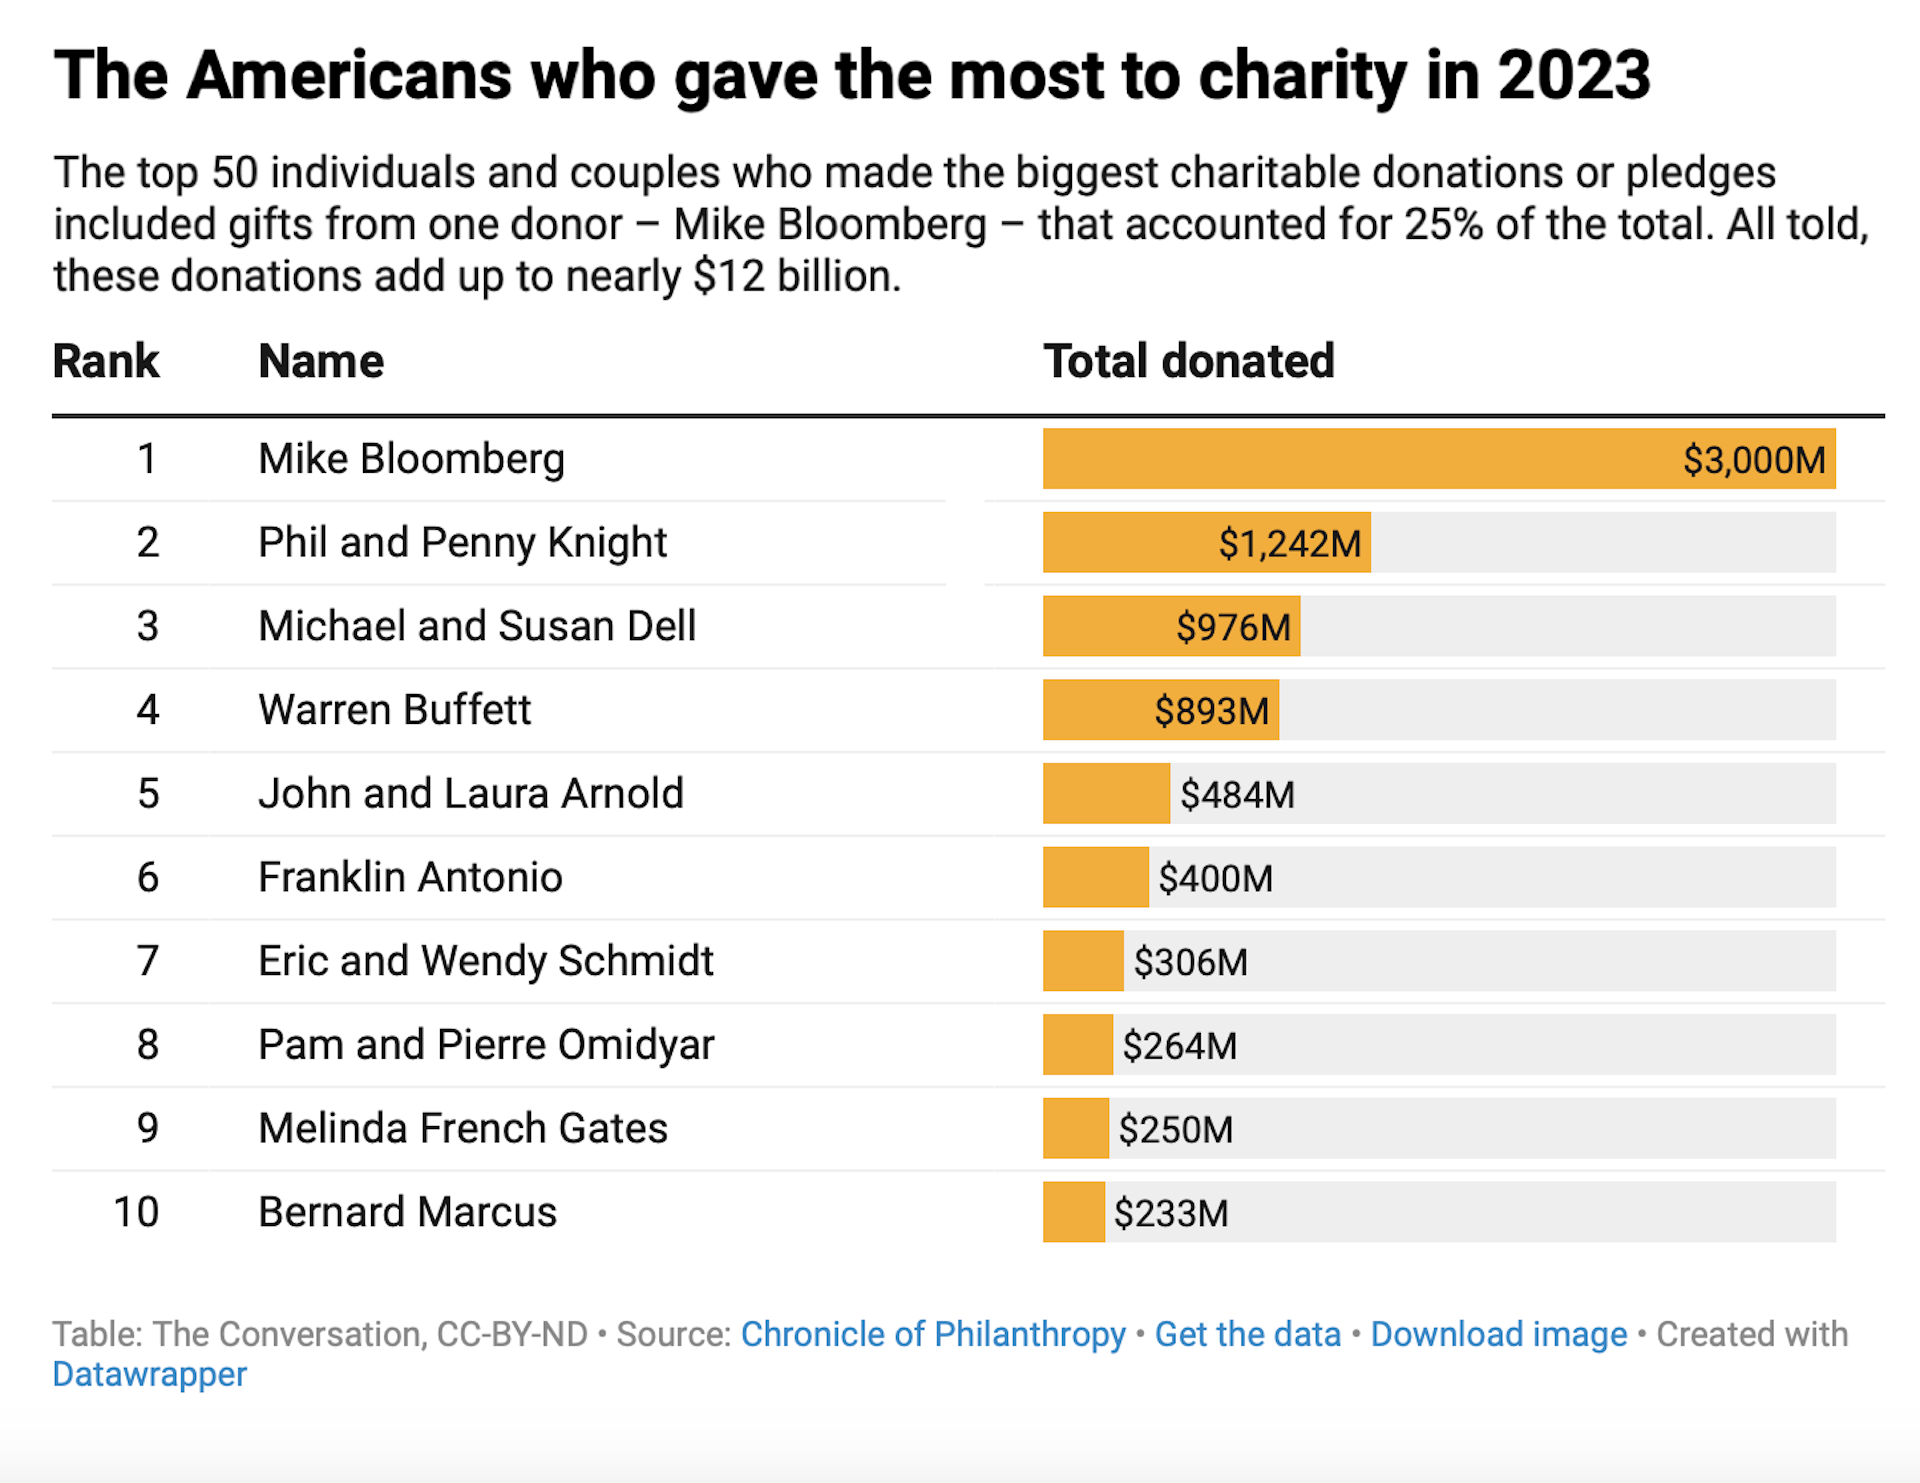 A bar chart shows how much the top 10 American philanthropists donated to charity in 2023, with Michael Bloomberg leading the way at $3 billion.